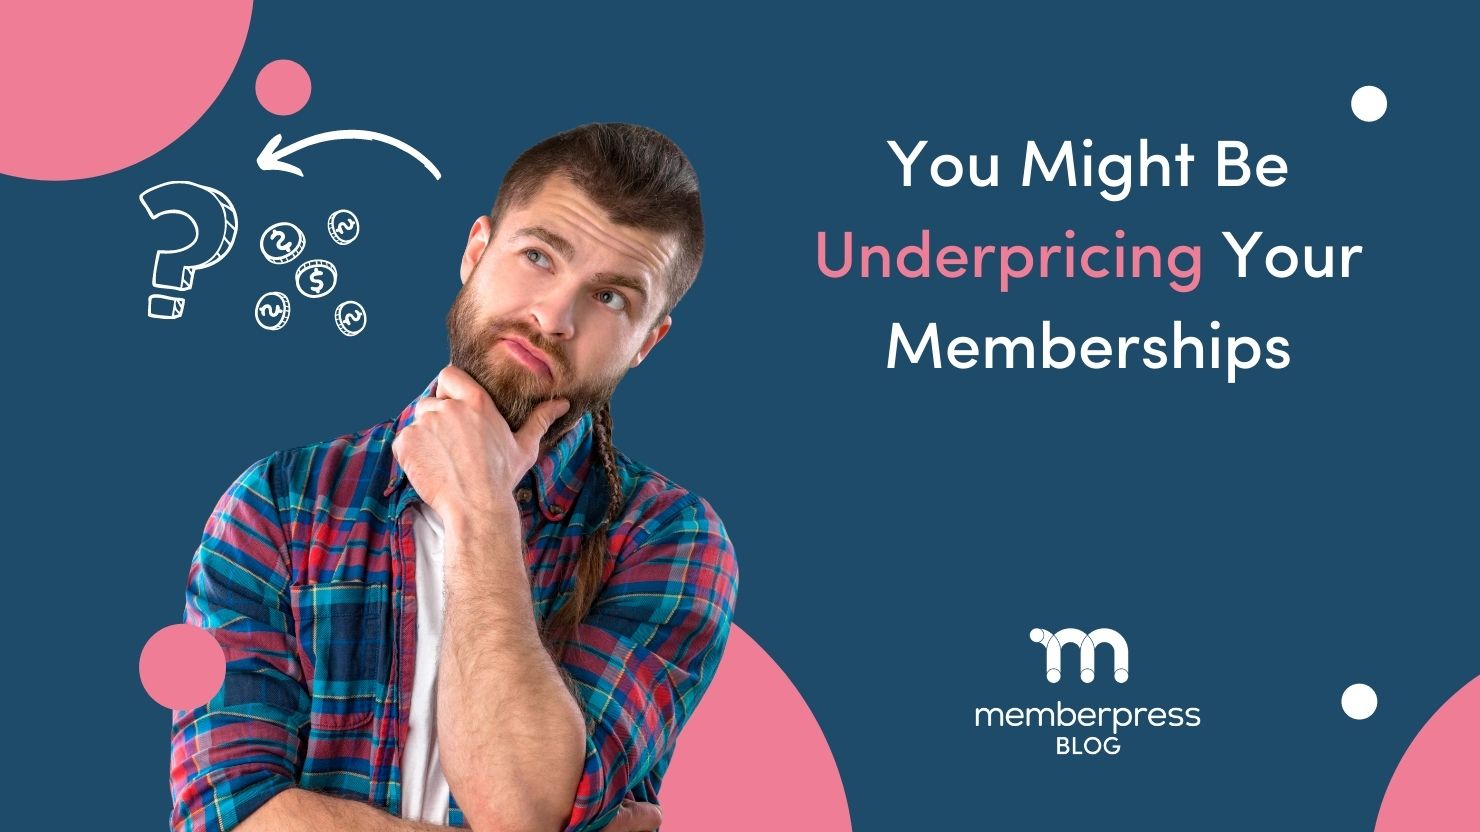 You might be underpricing your memberships